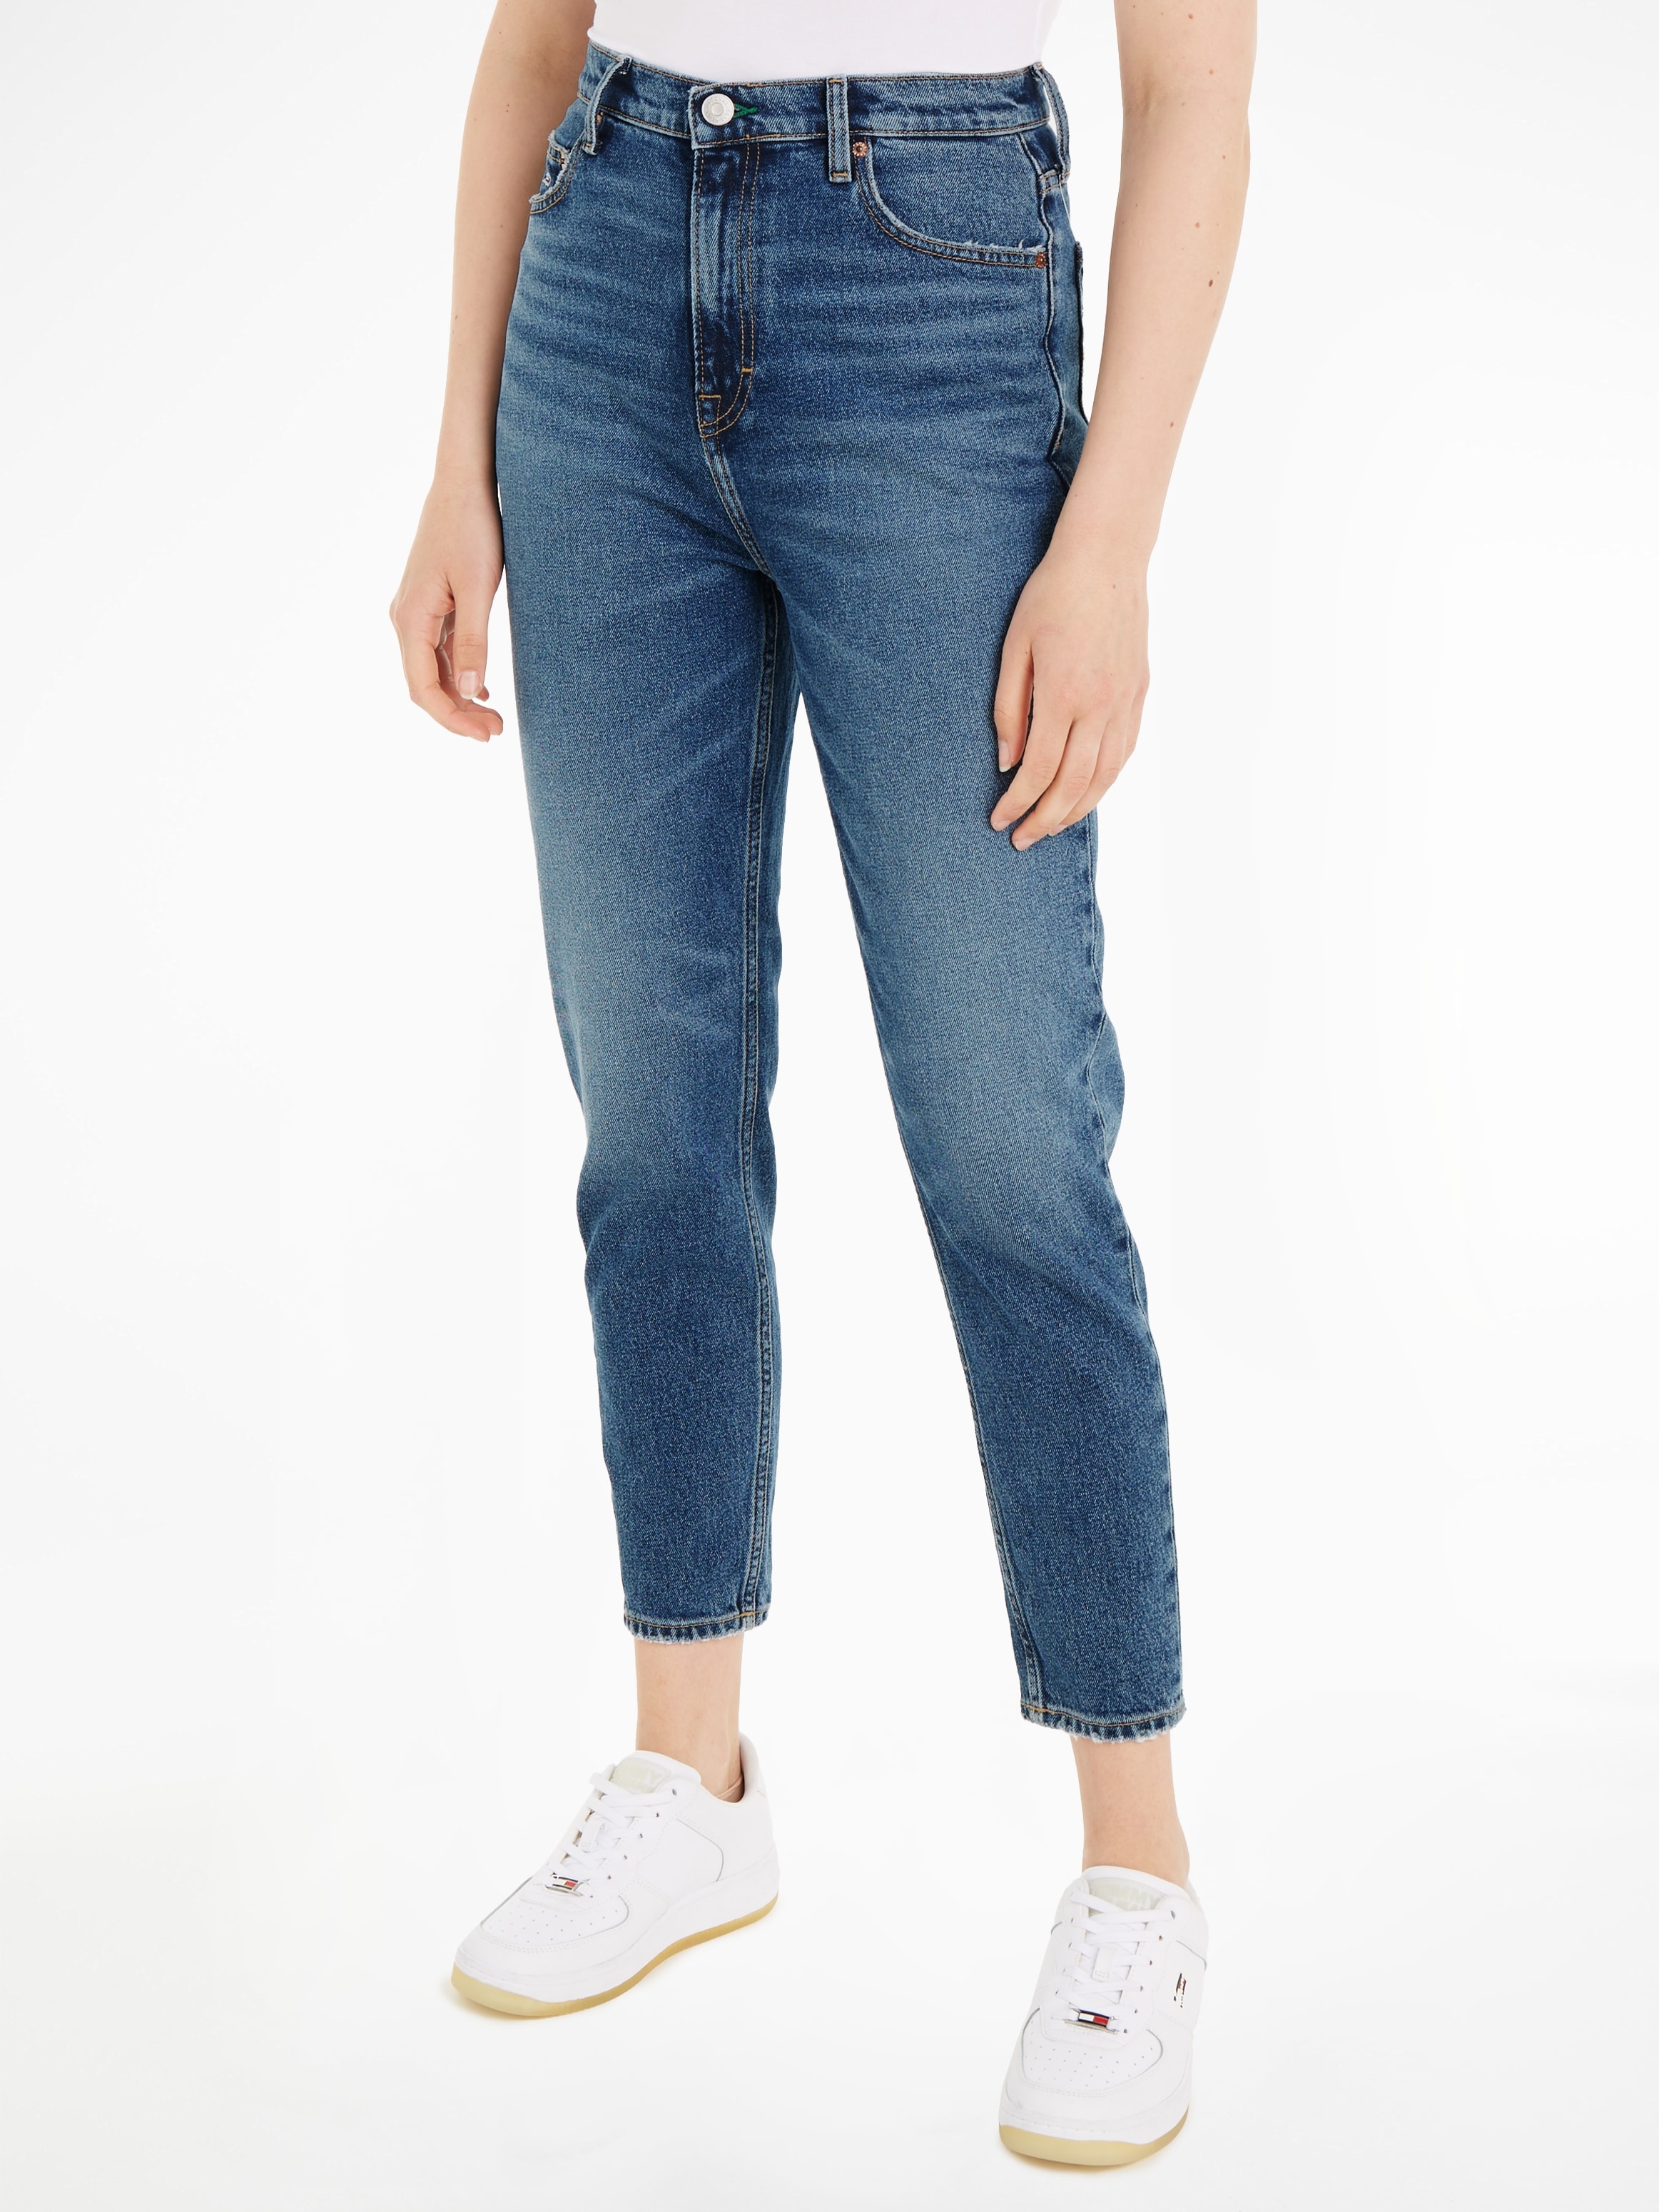 UH Mom-Jeans bestellen Jeans Jeans CG4215«, Tommy Tommy mit Logo-Badge SLIM Flag »MOM &